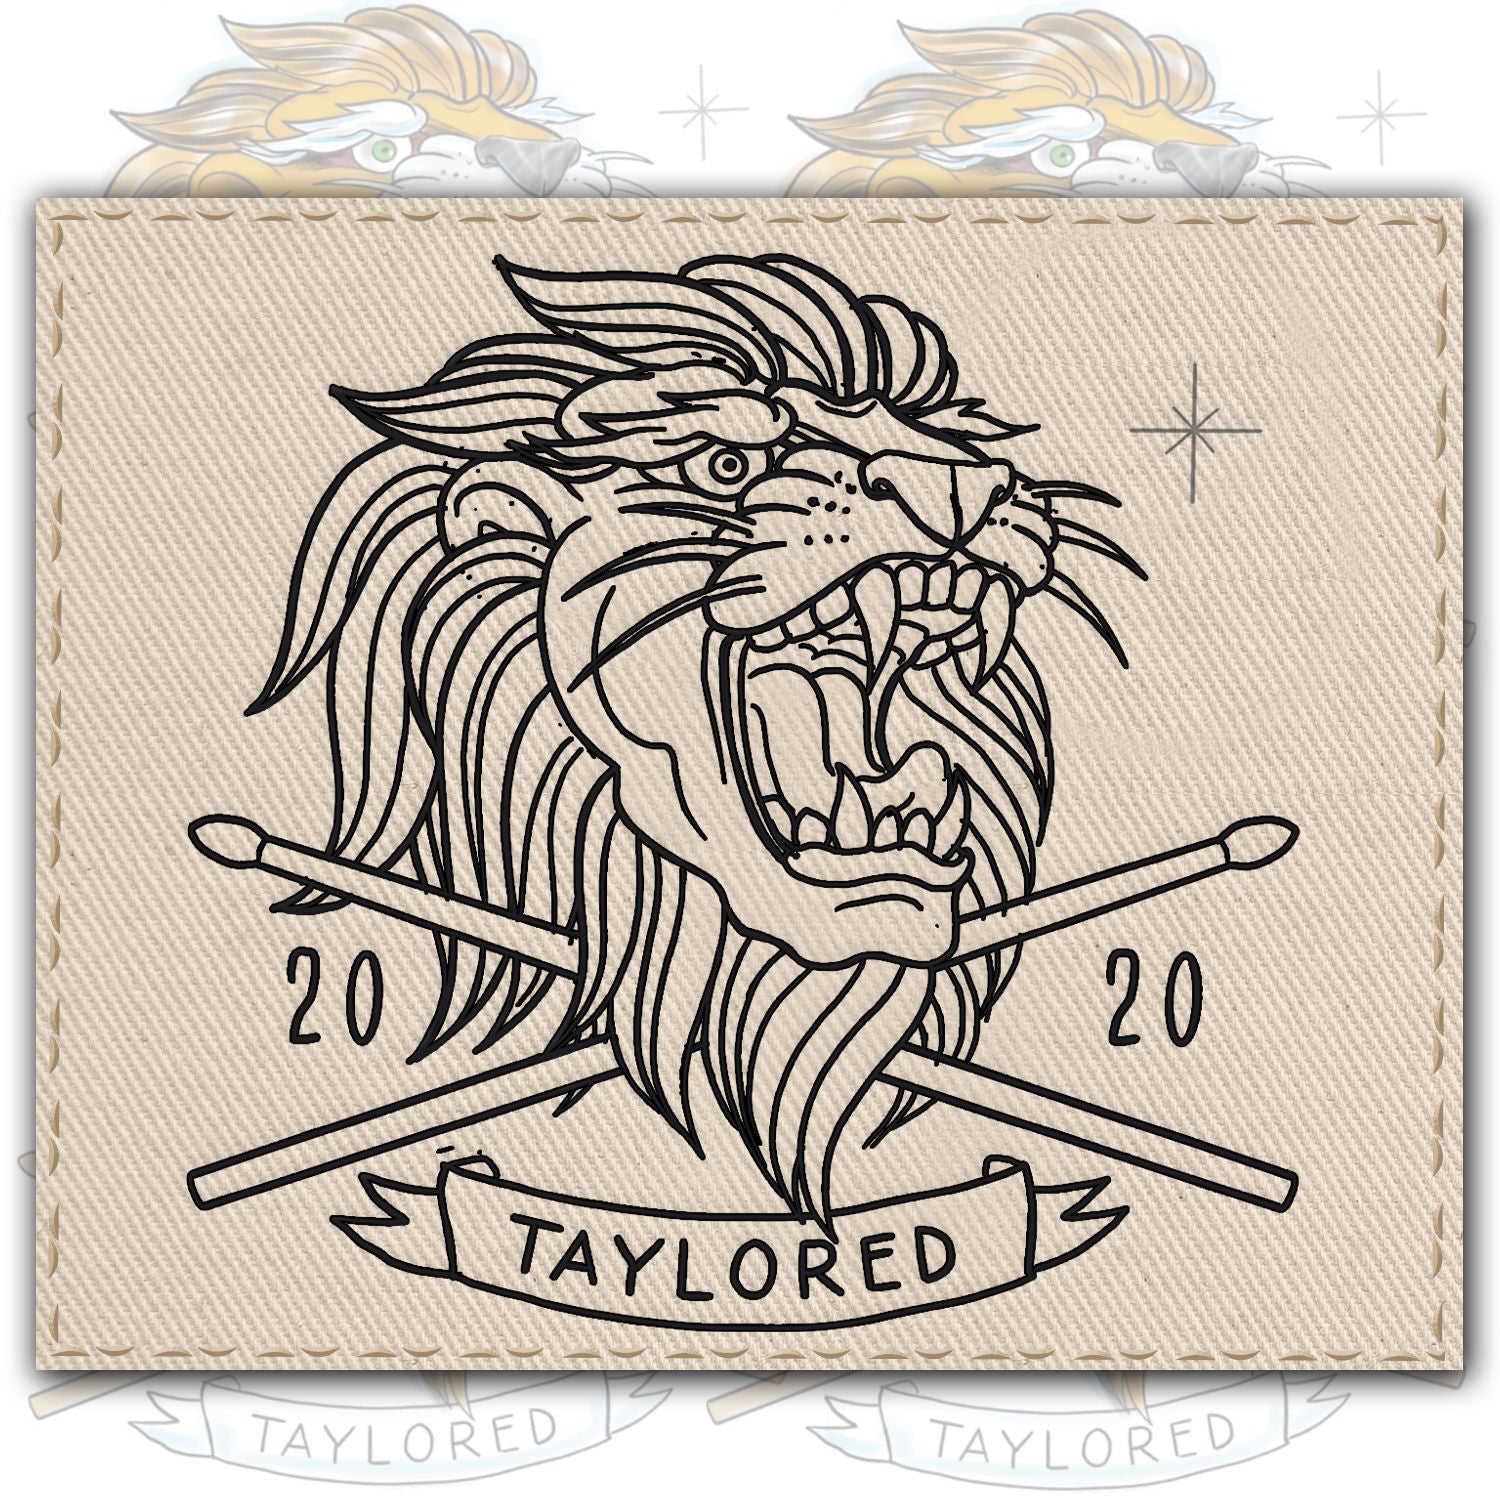 Roger Taylor - 'Taylored' 2020 Embroidered Lion Patch Sweatshirt